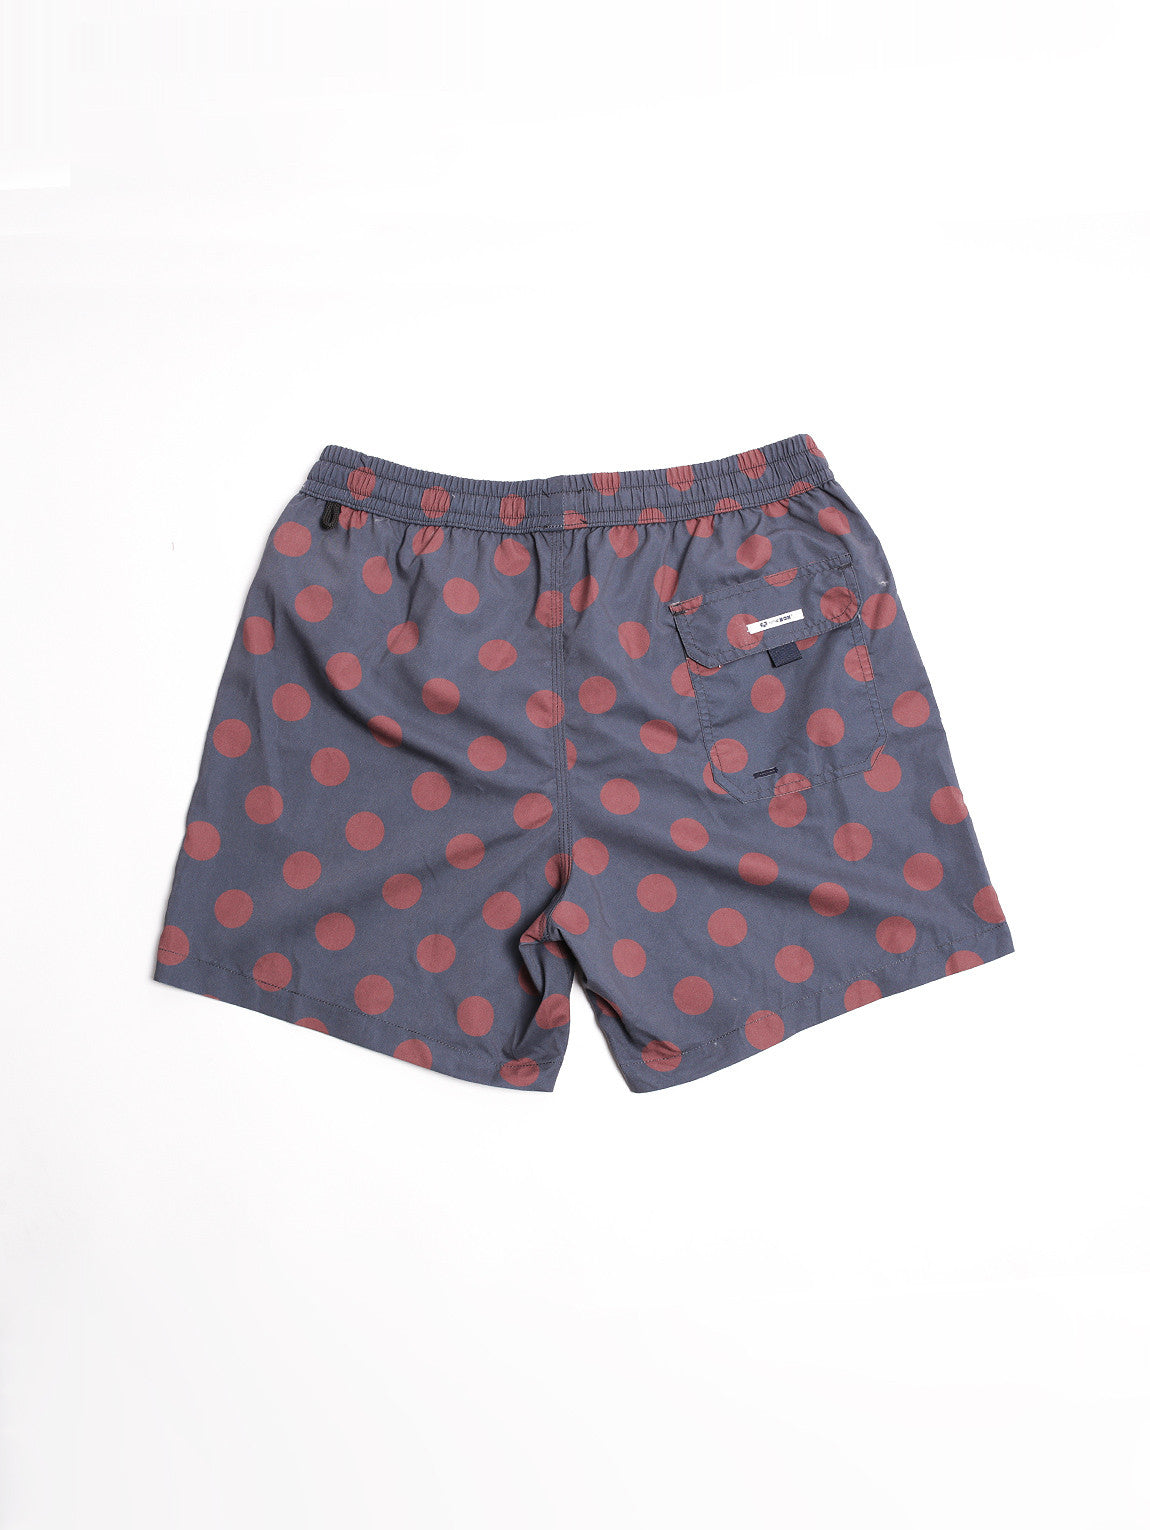 BOXER POIS Blue Navy/Burgundy-Costumi-in the box-TRYME Shop